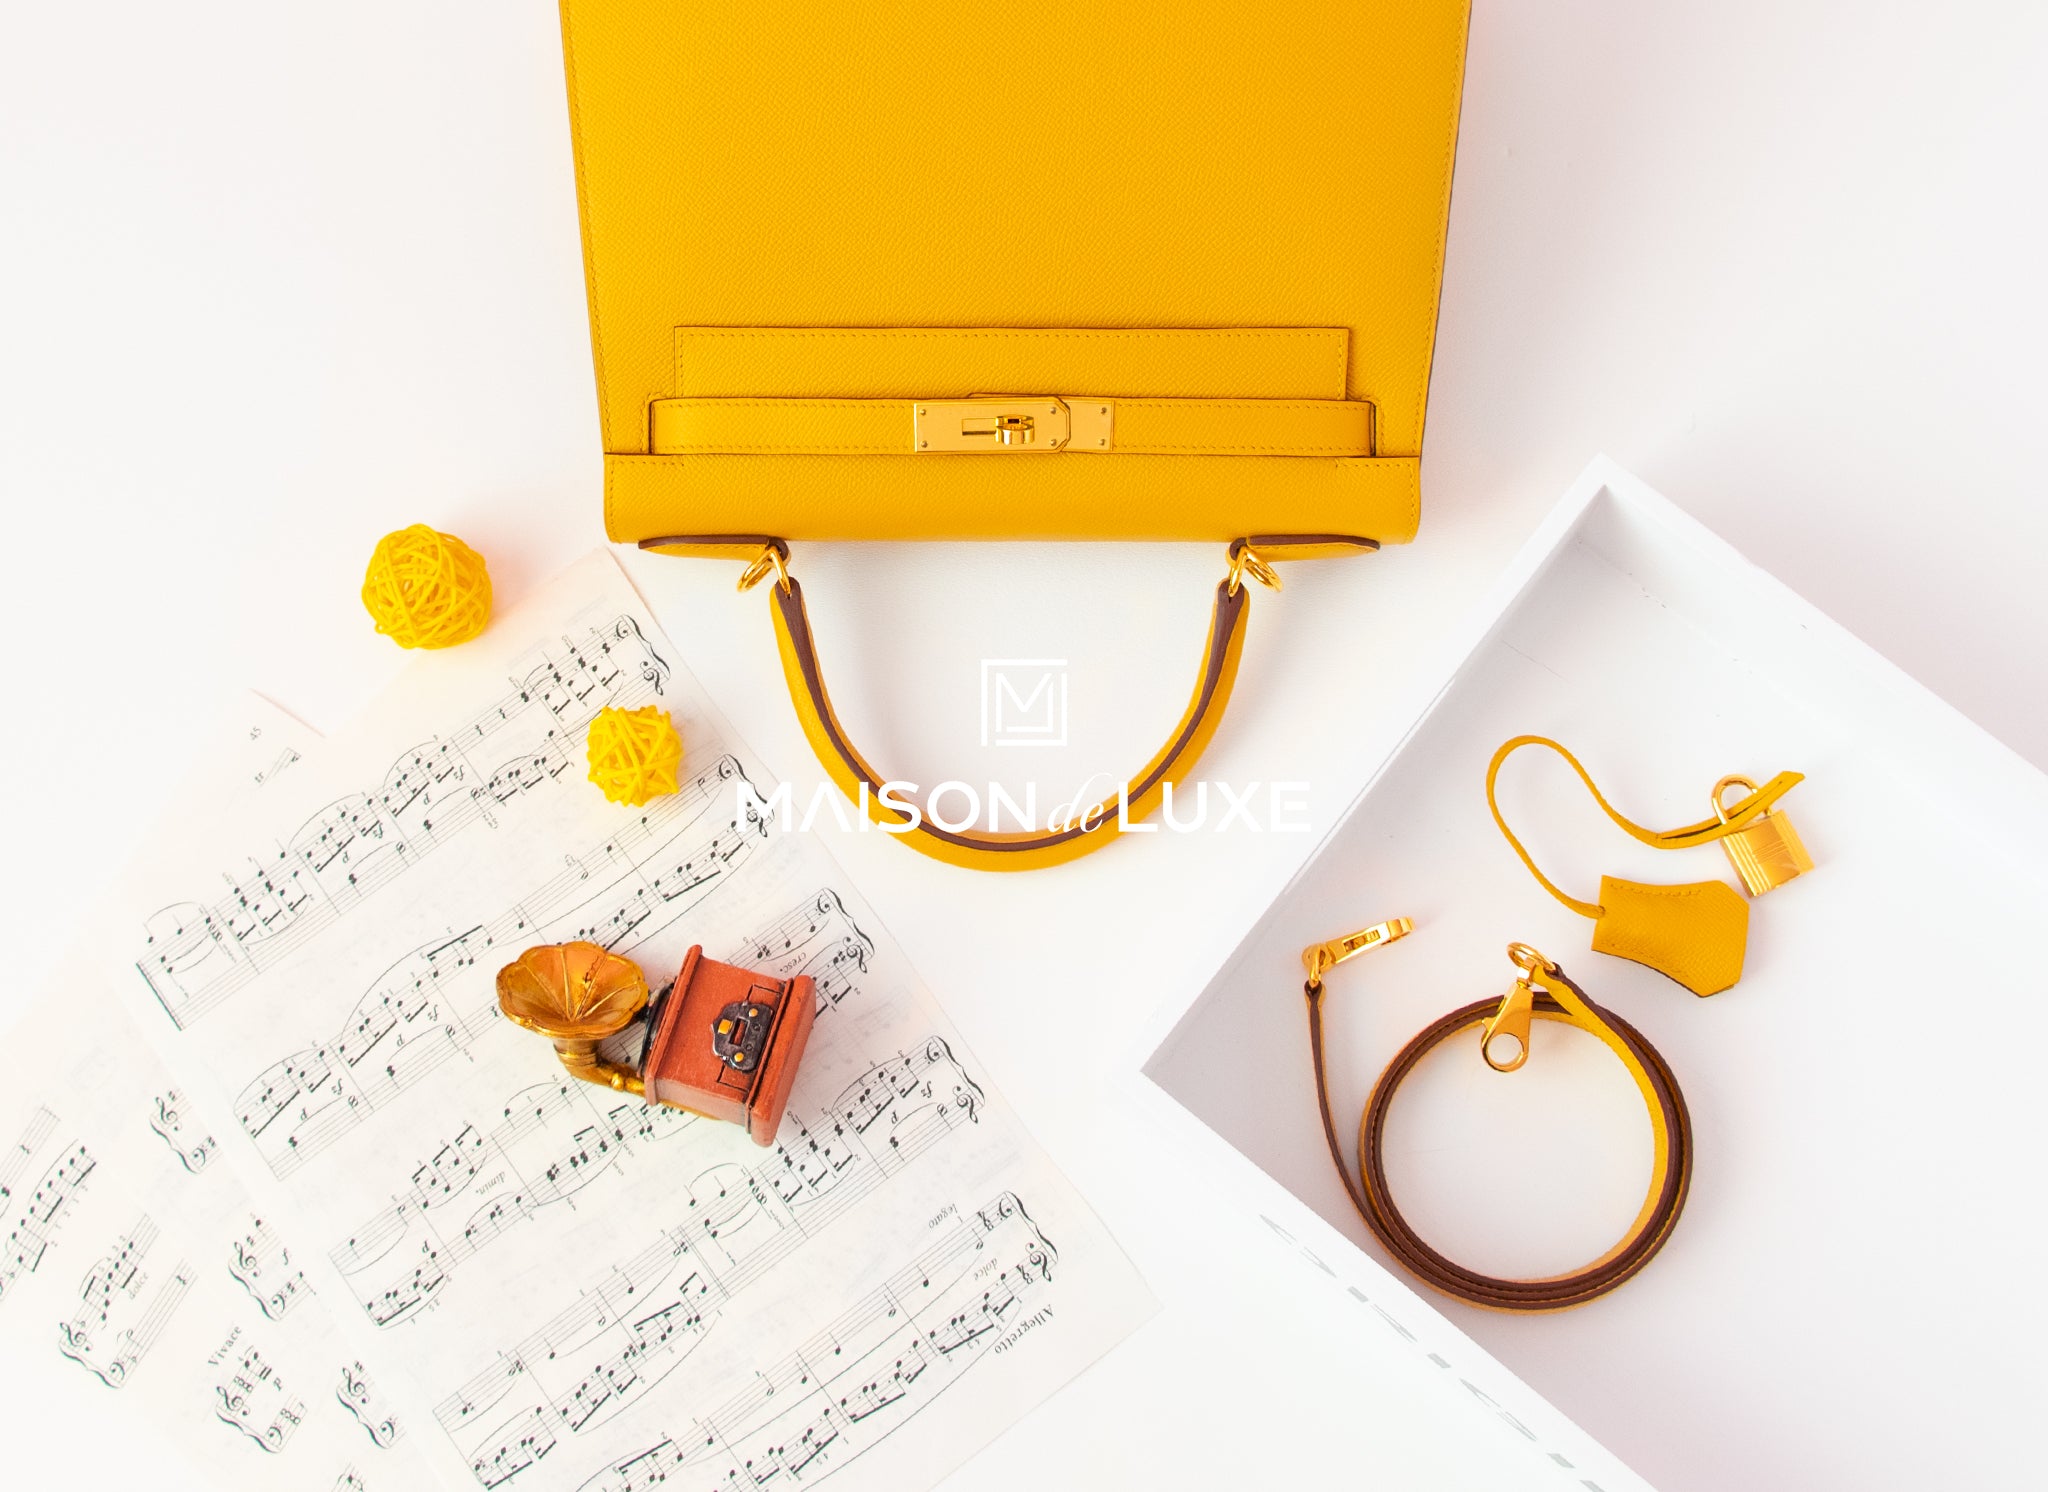 Hermes Gold / Jaune Ambre Kelly Sellier 28 PHW at 1stDibs